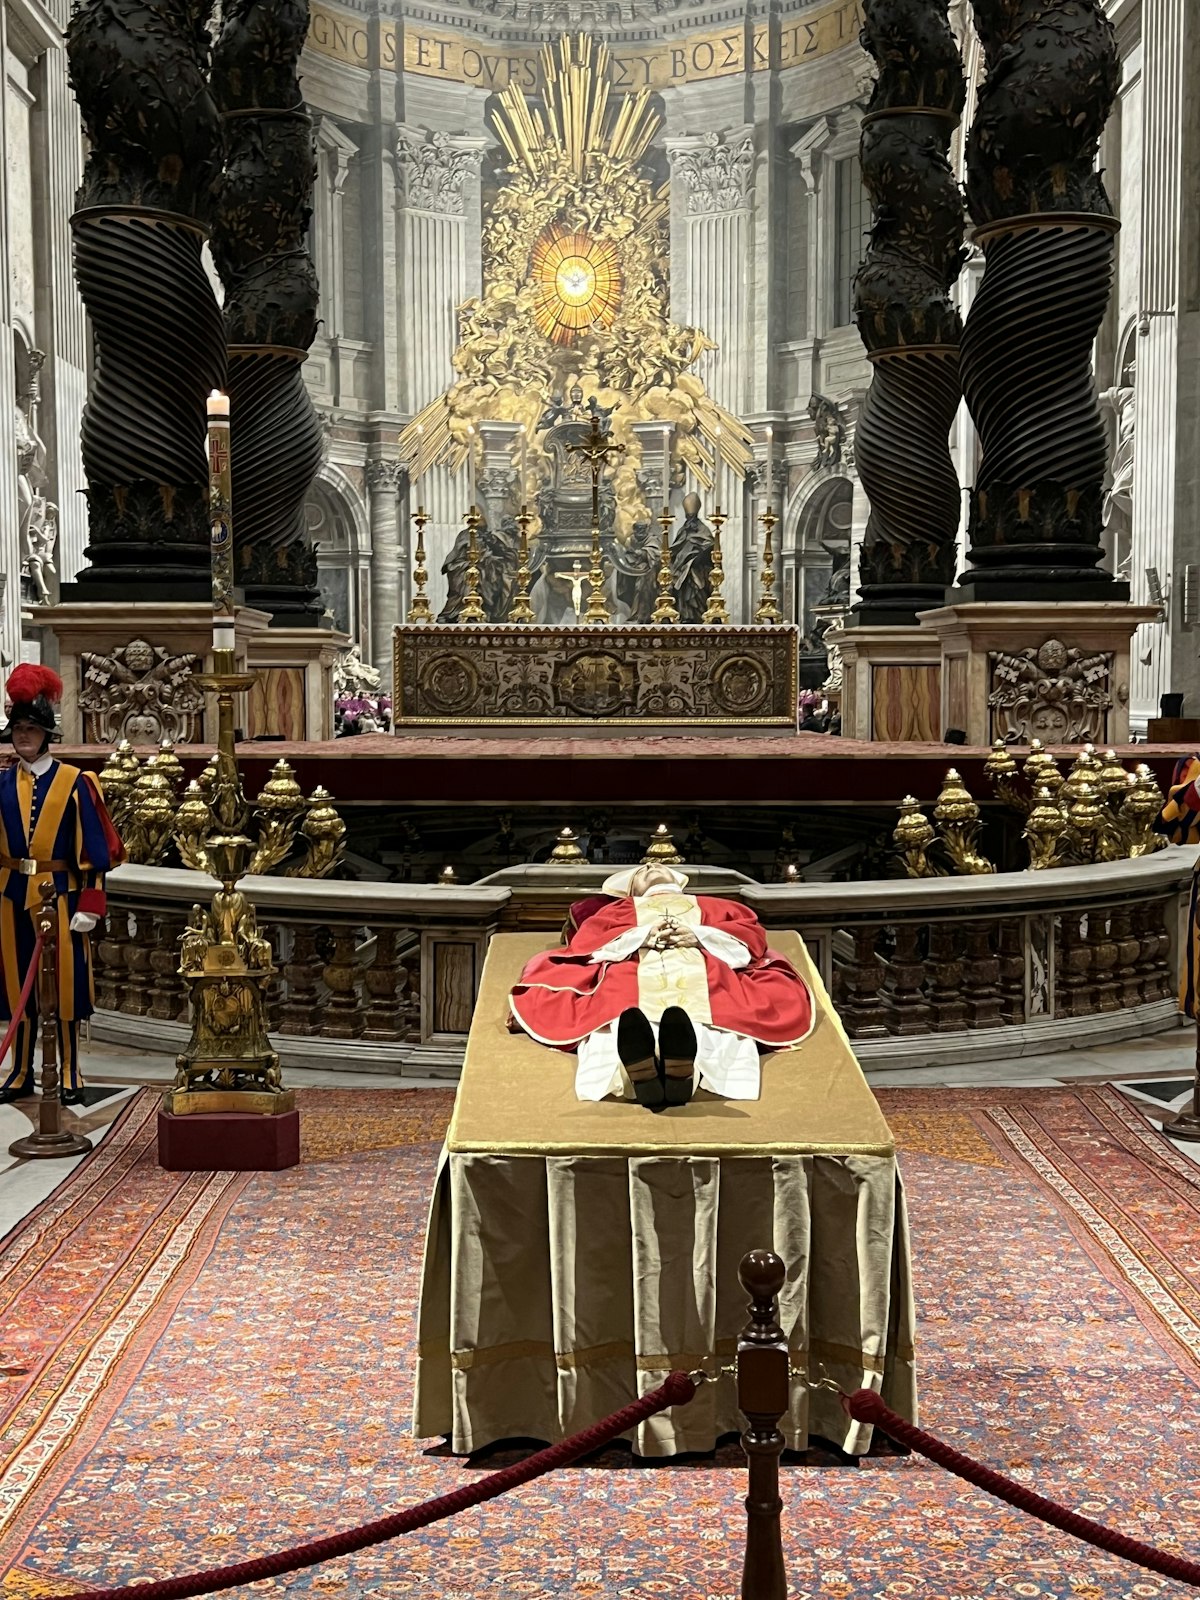 John Hale had the opportunity to pray over Pope Benedict XVI while he lay in state in St. Peter's Basilica.